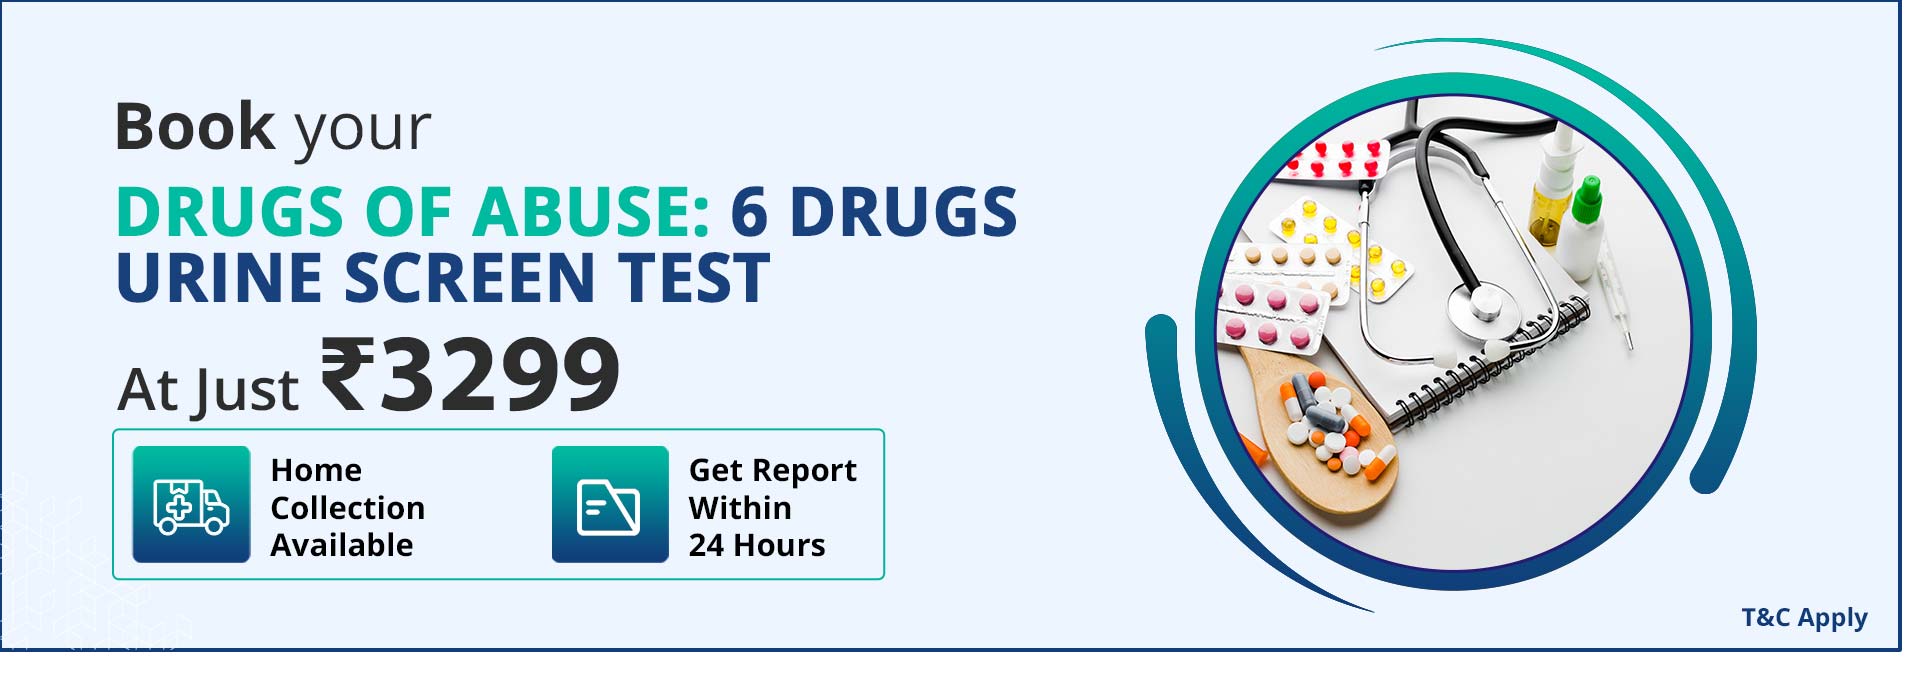 Drugs of Abuse: 6 Drugs Urine Screen Test